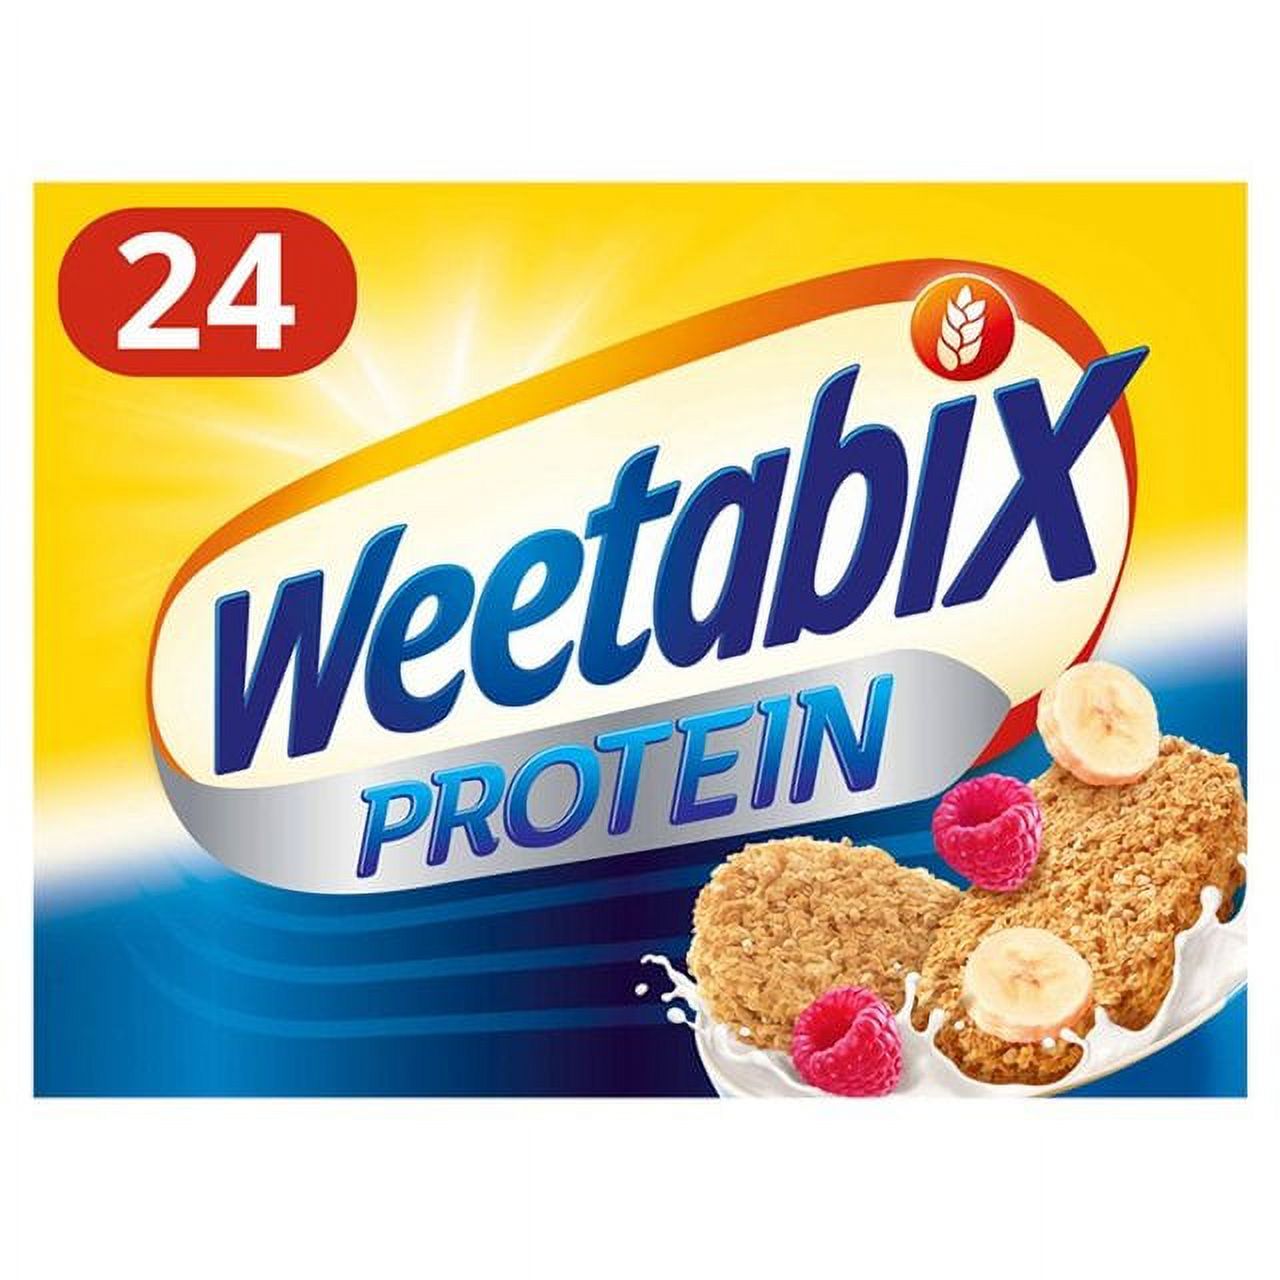 Weetabix Protein Cereal 24 per pack - image 1 of 1